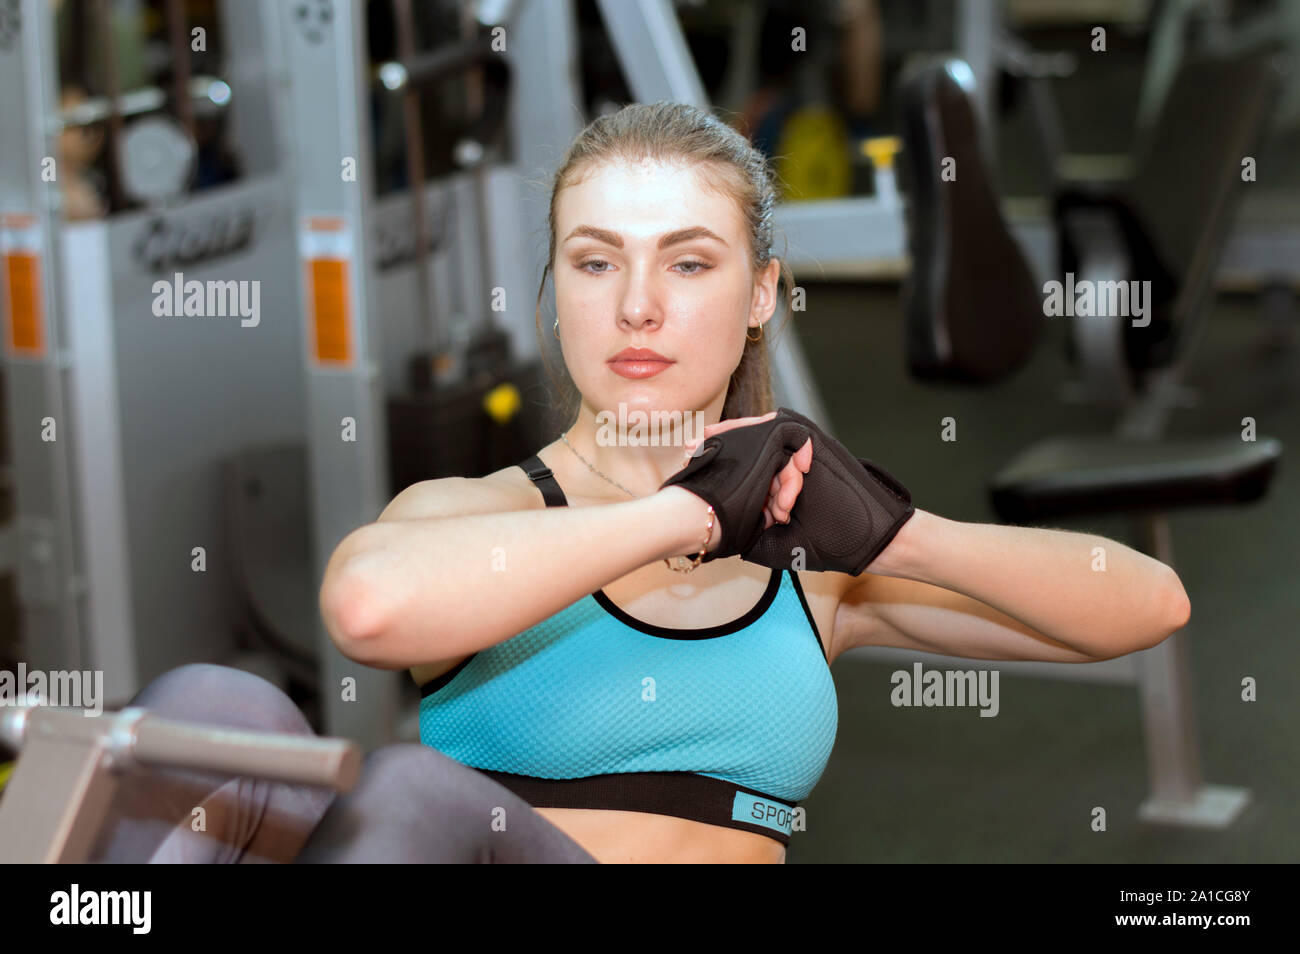 Woman at gymnastic physical training fitness exercise in gym. Stock Photo